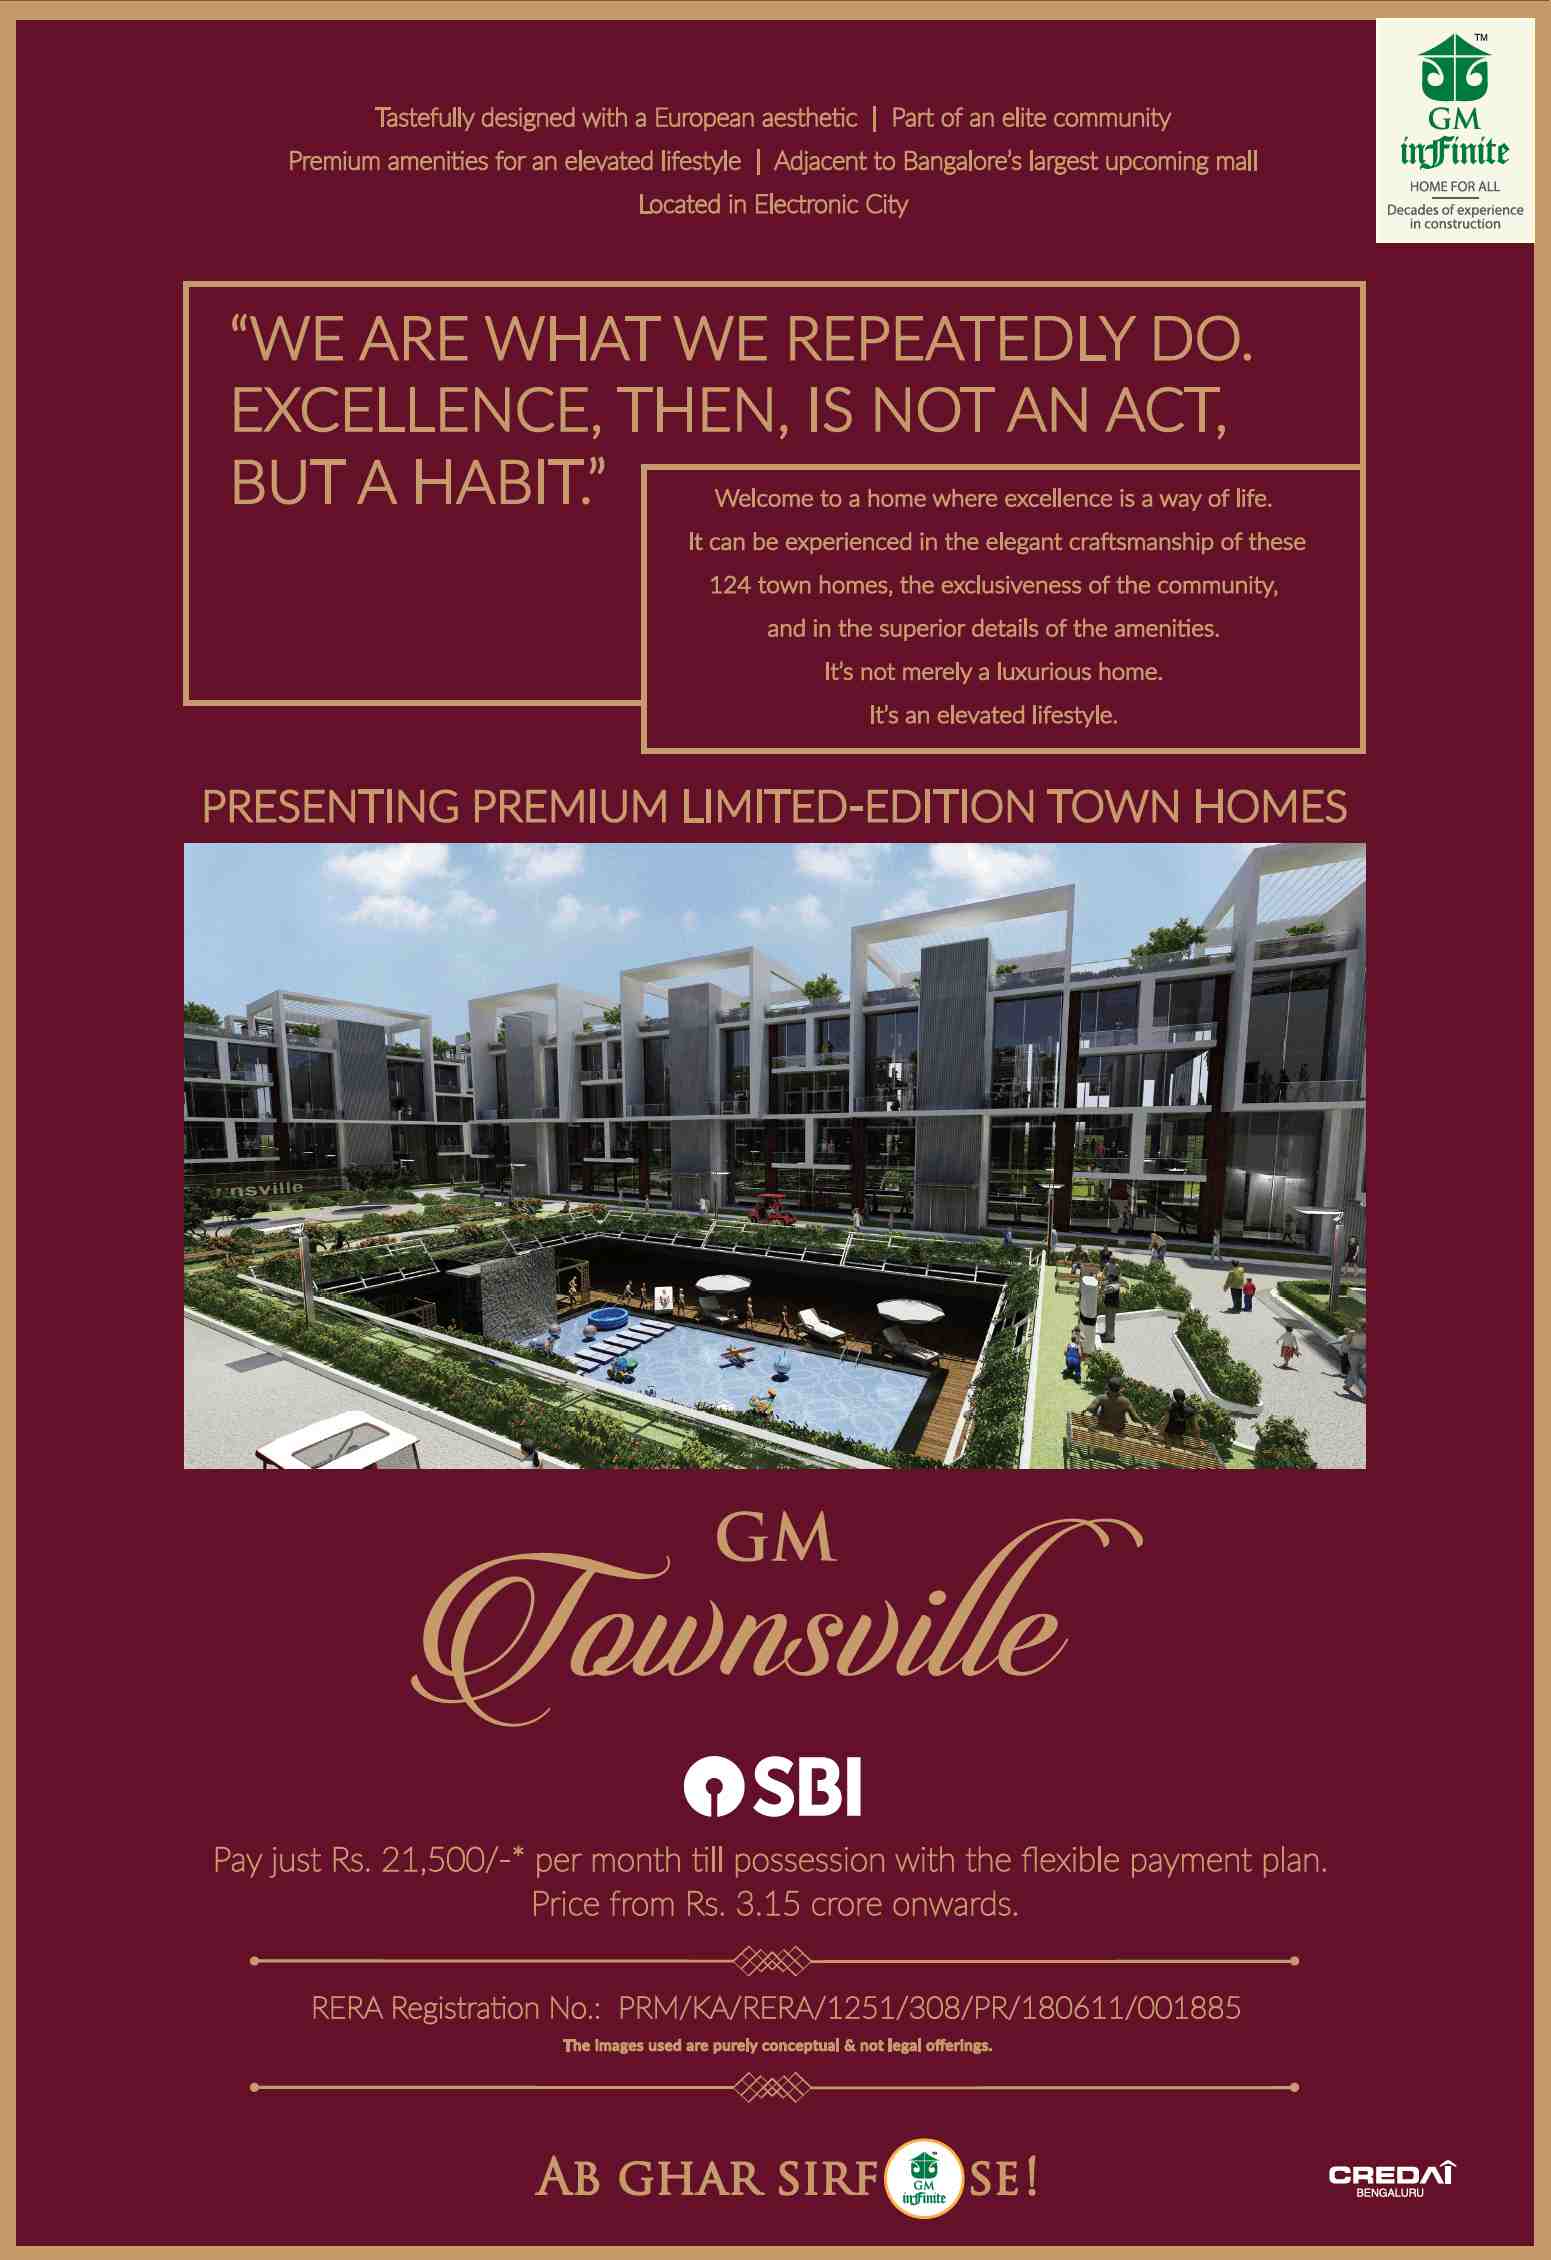 Pay just Rs 21500 per month till possession with flexible payment plan at GM Townsville in Bangalore